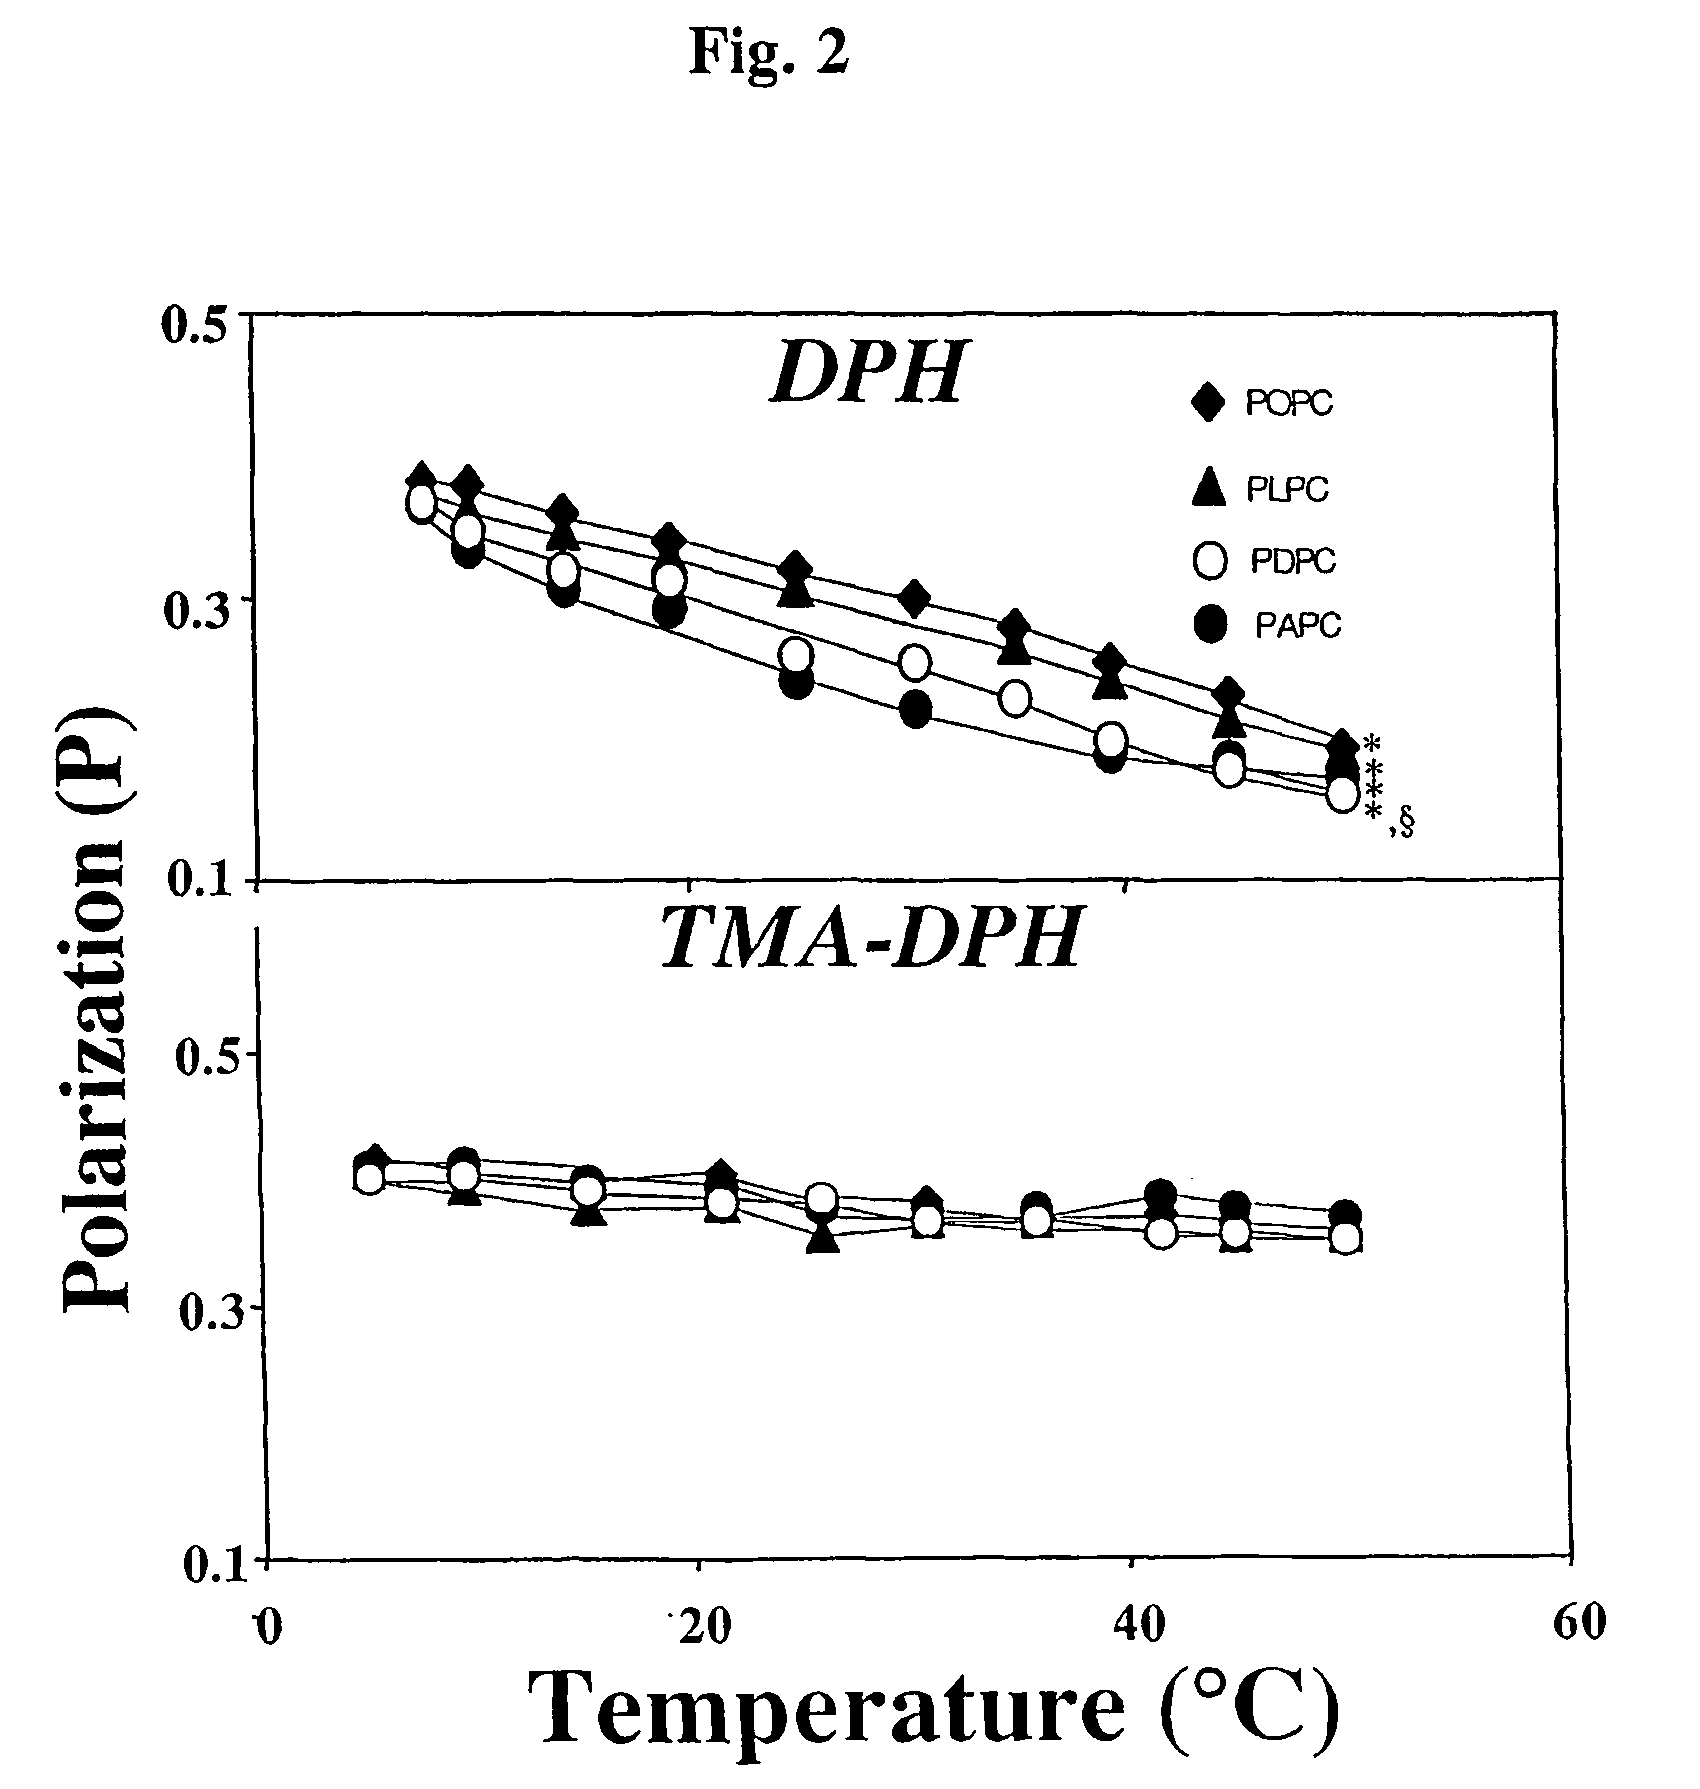 Spheroidal hdl particles with a defined phospholipid composition